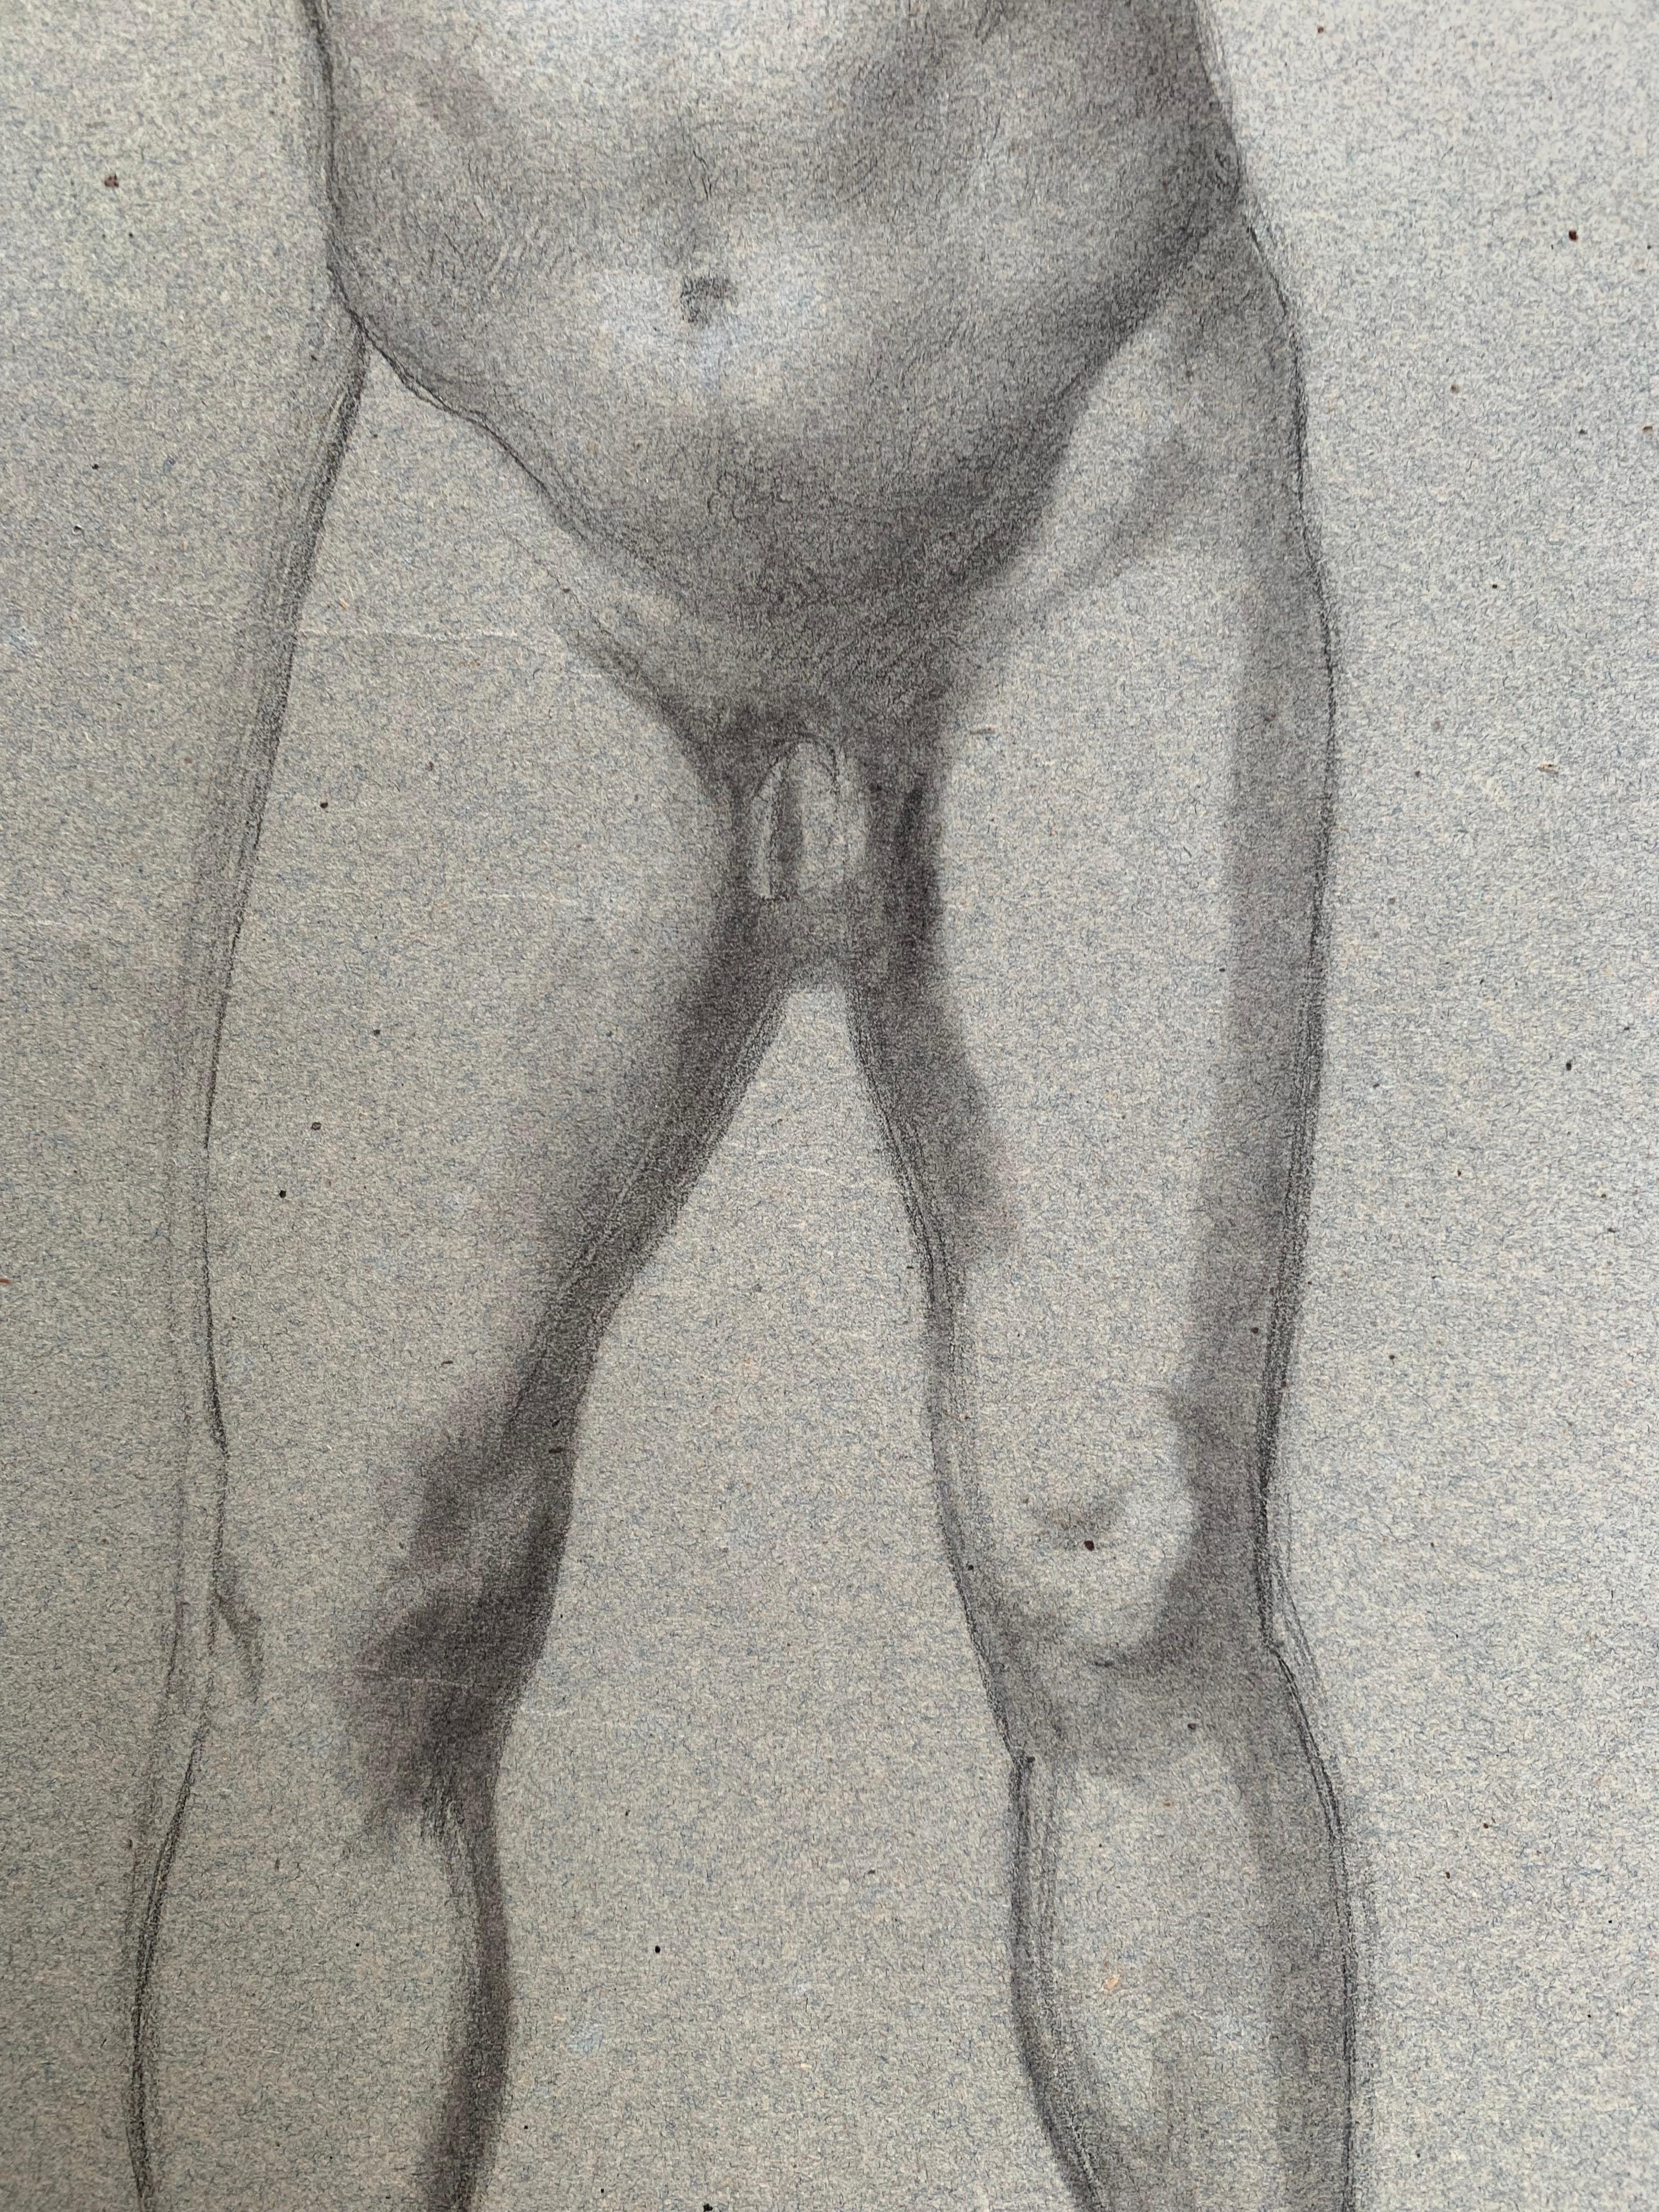 Preparatory anatomical study for the figure of a man with hands on his face. - Academic Art by Enrico Reffo